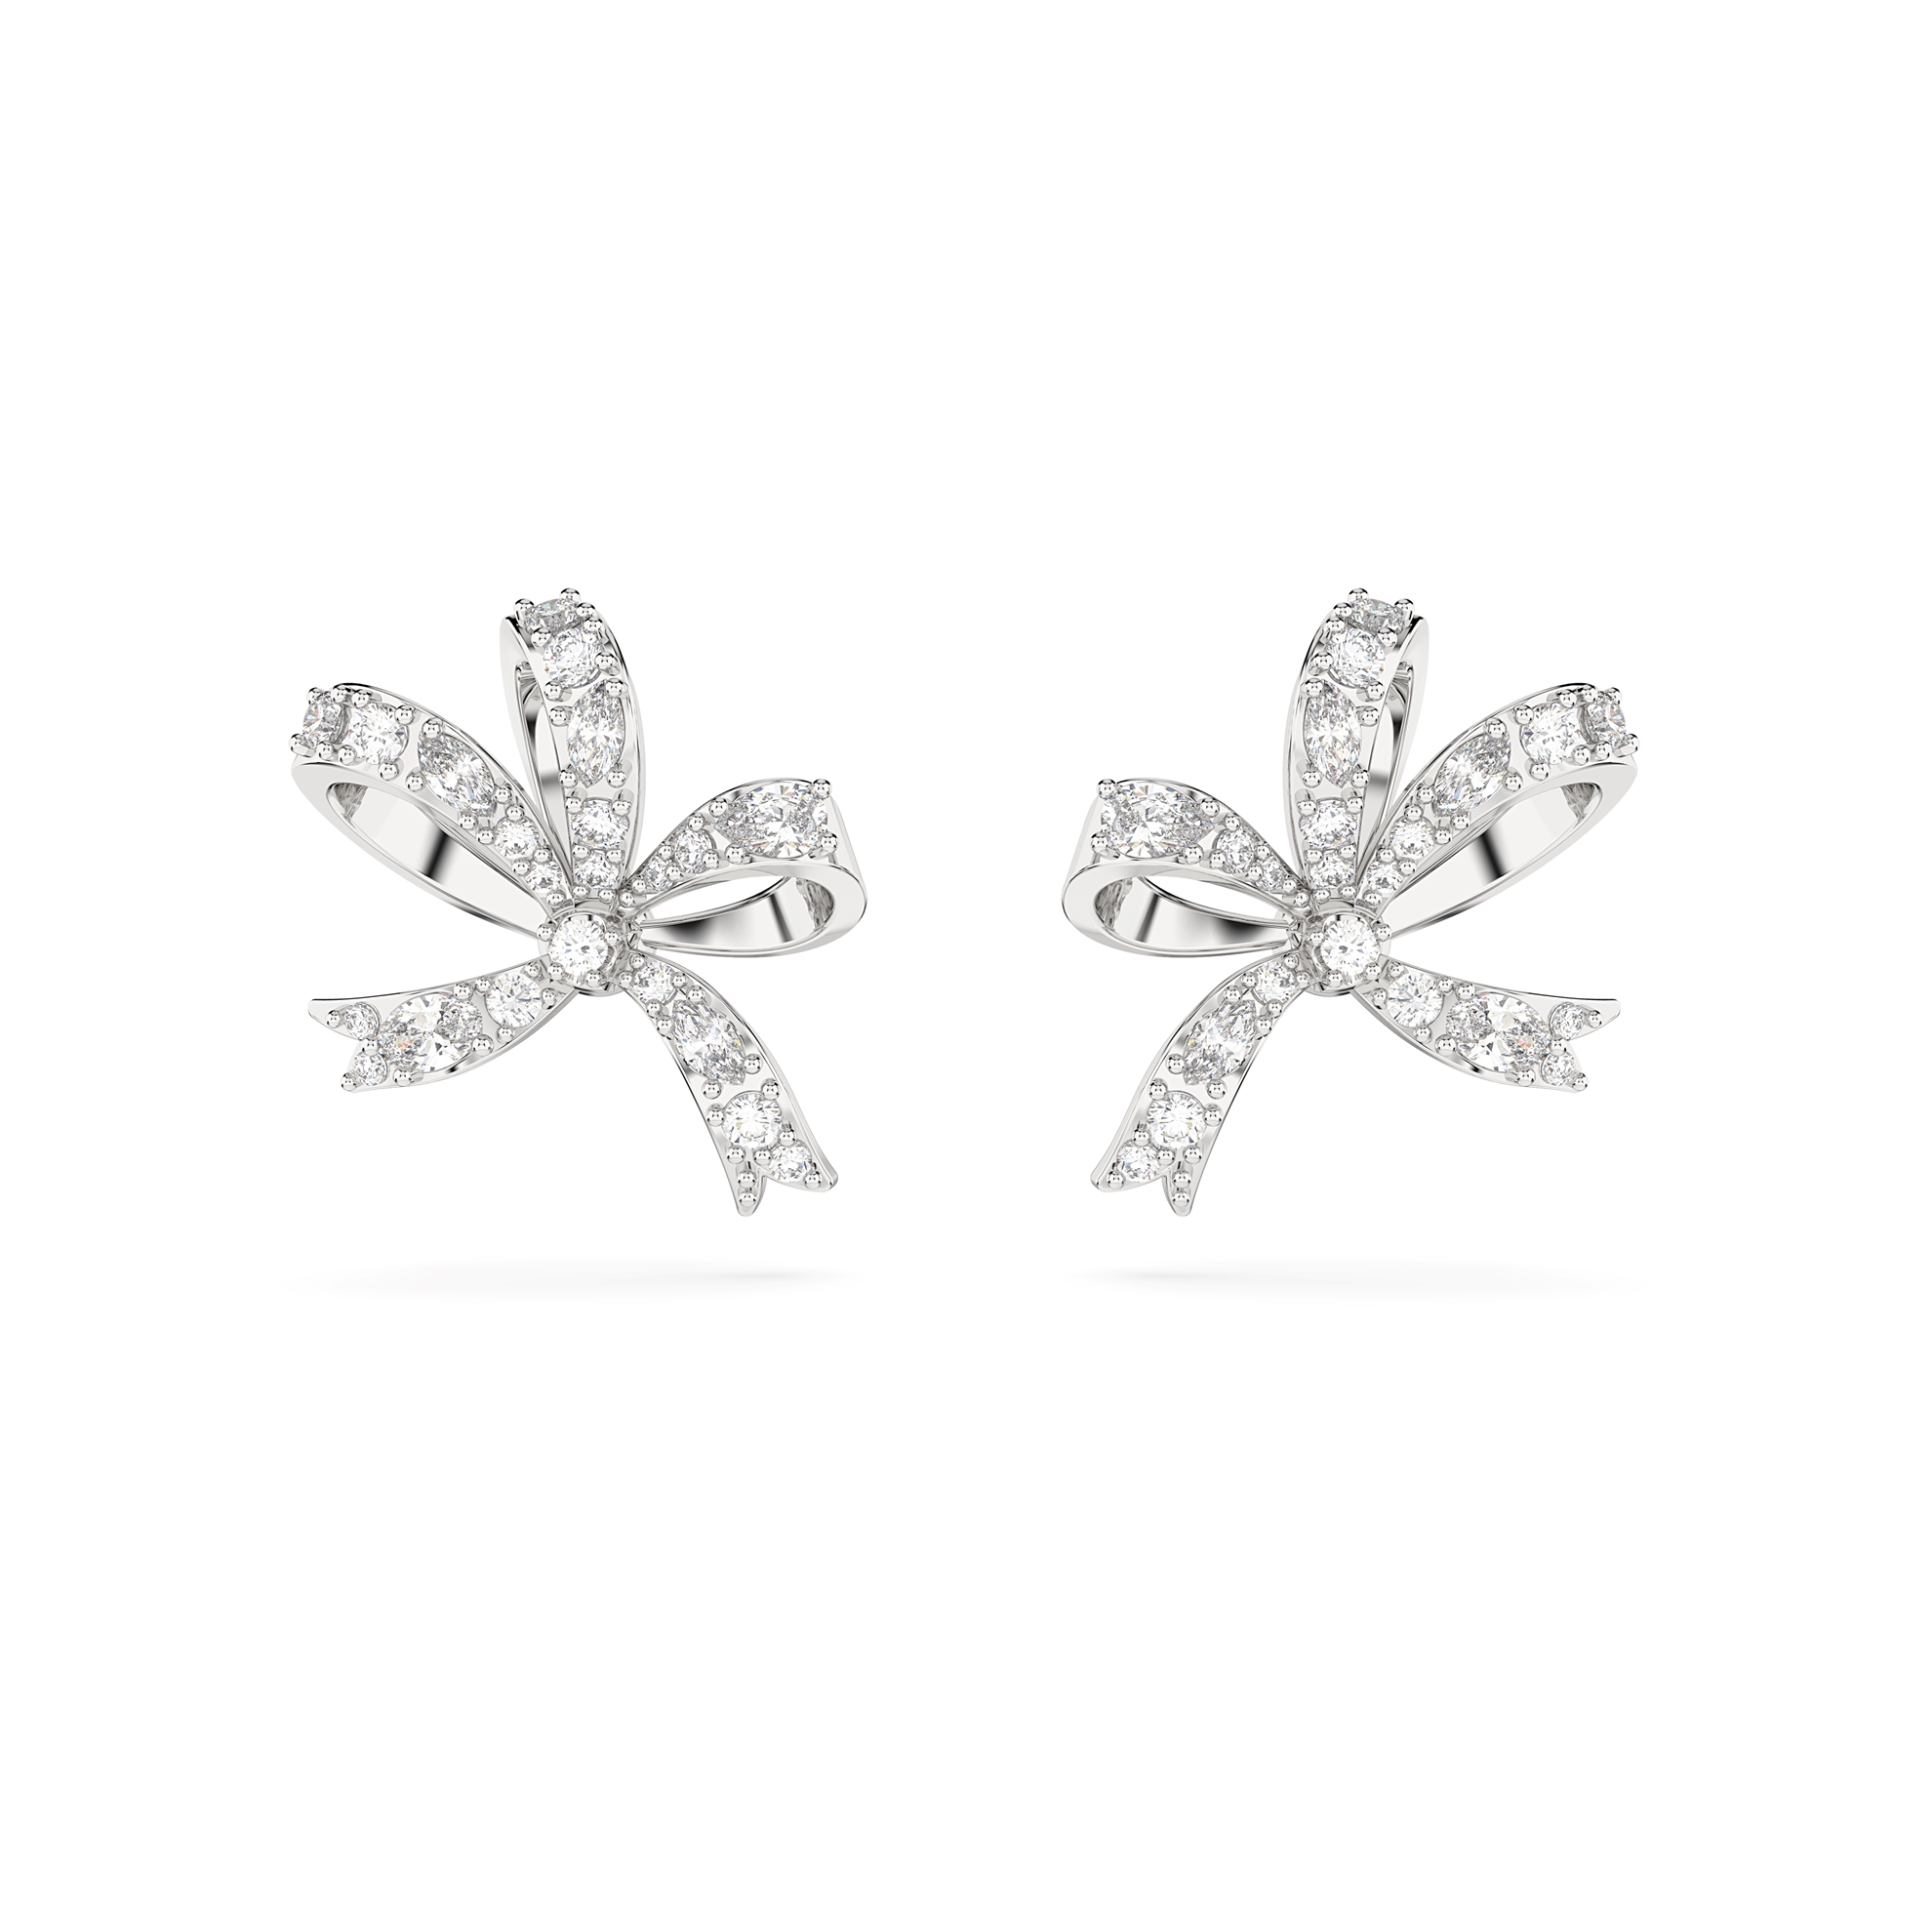 Picture of Volta stud earrings